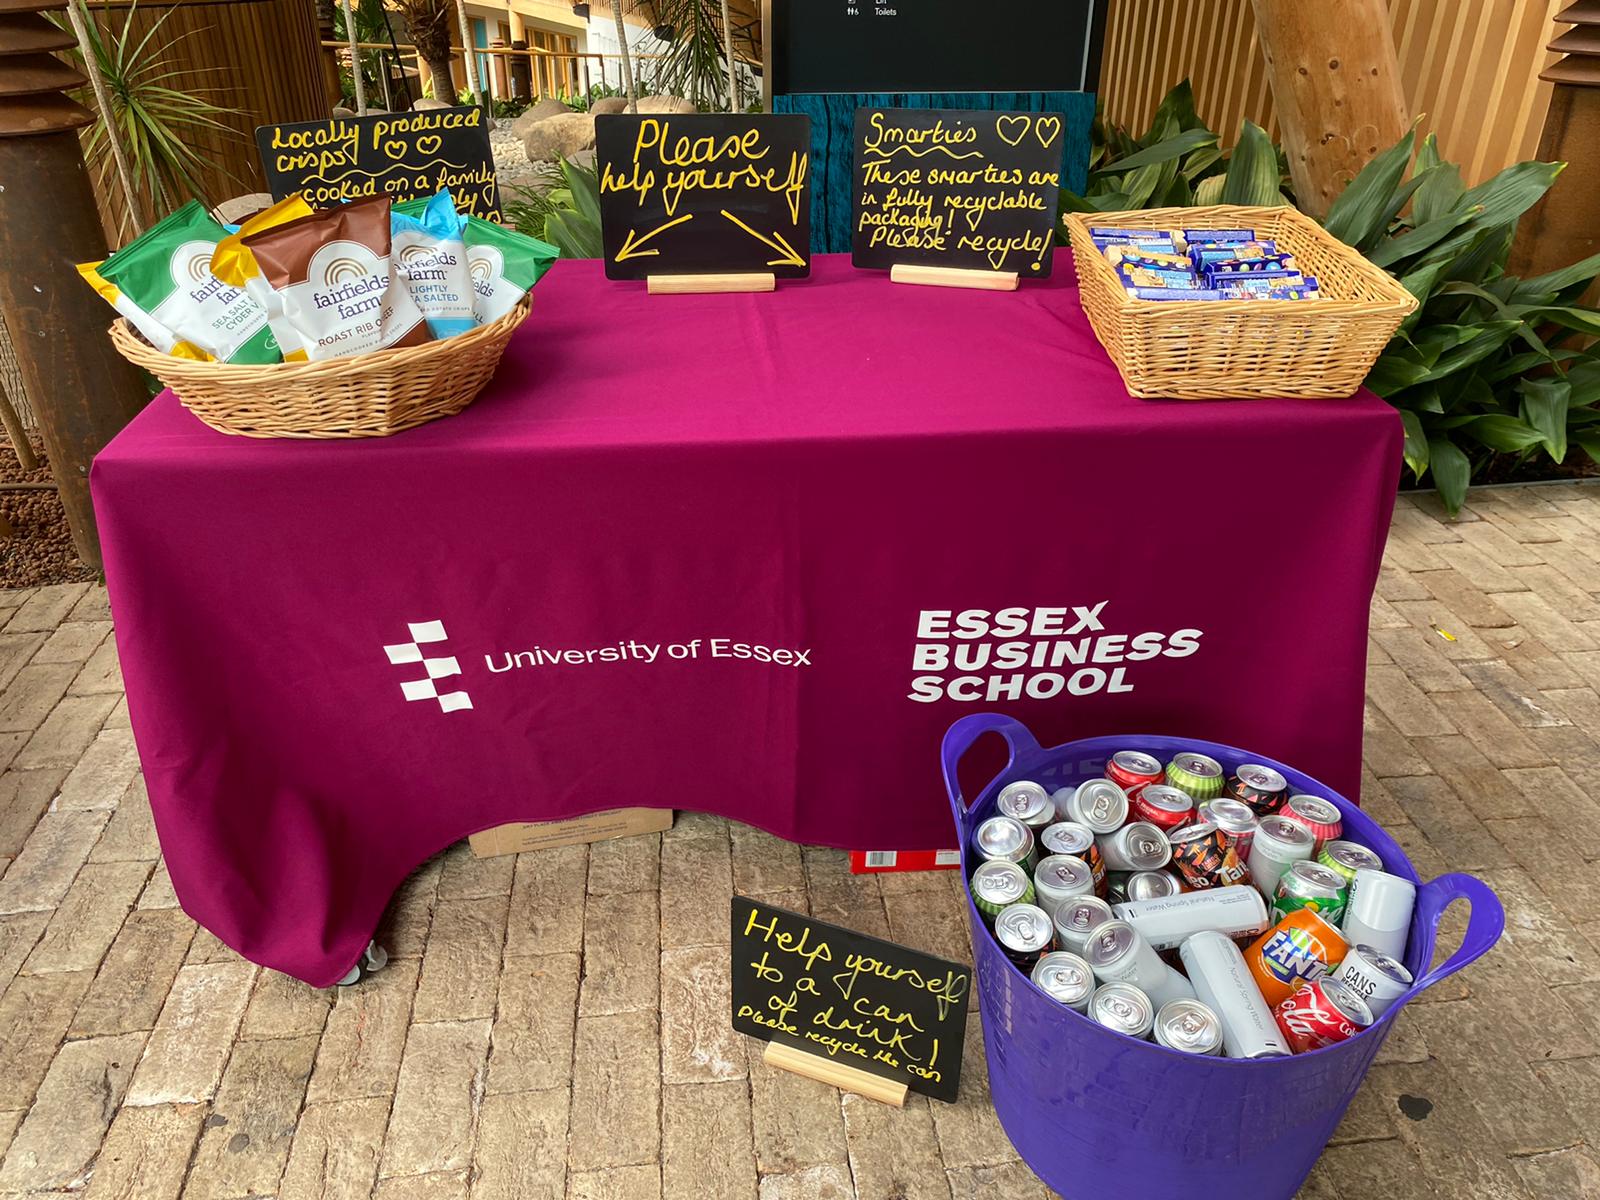 Table with chocolates and crisps on top and a basket of canned drinks in front with signs reminding guests to recycle